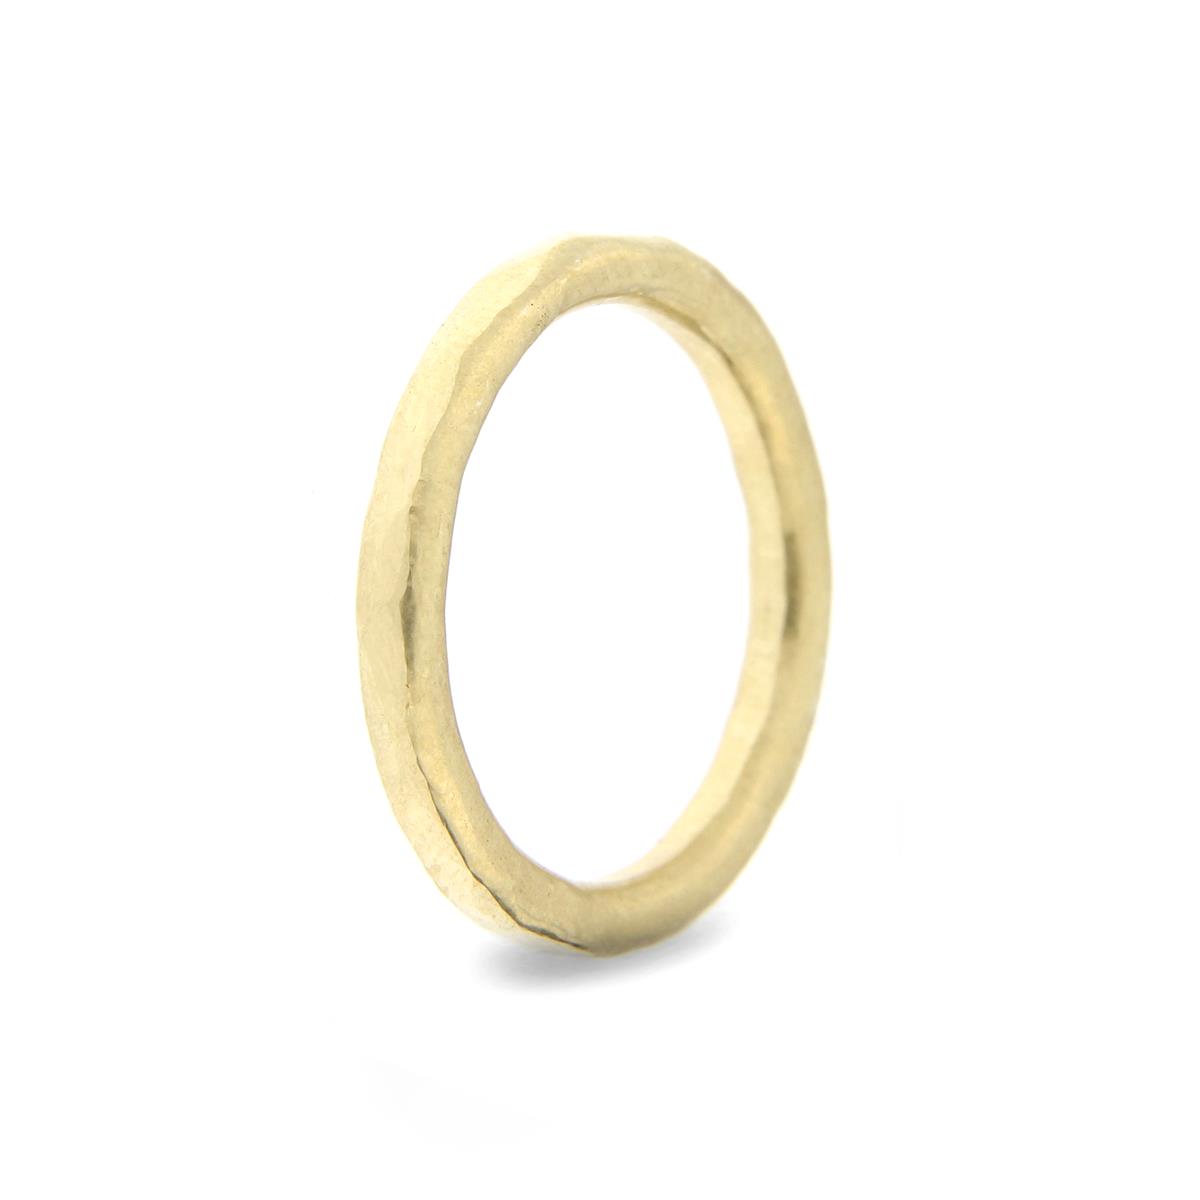 Katie g. Jewellery - Hammered Ring 2,5mm - Champ Gold